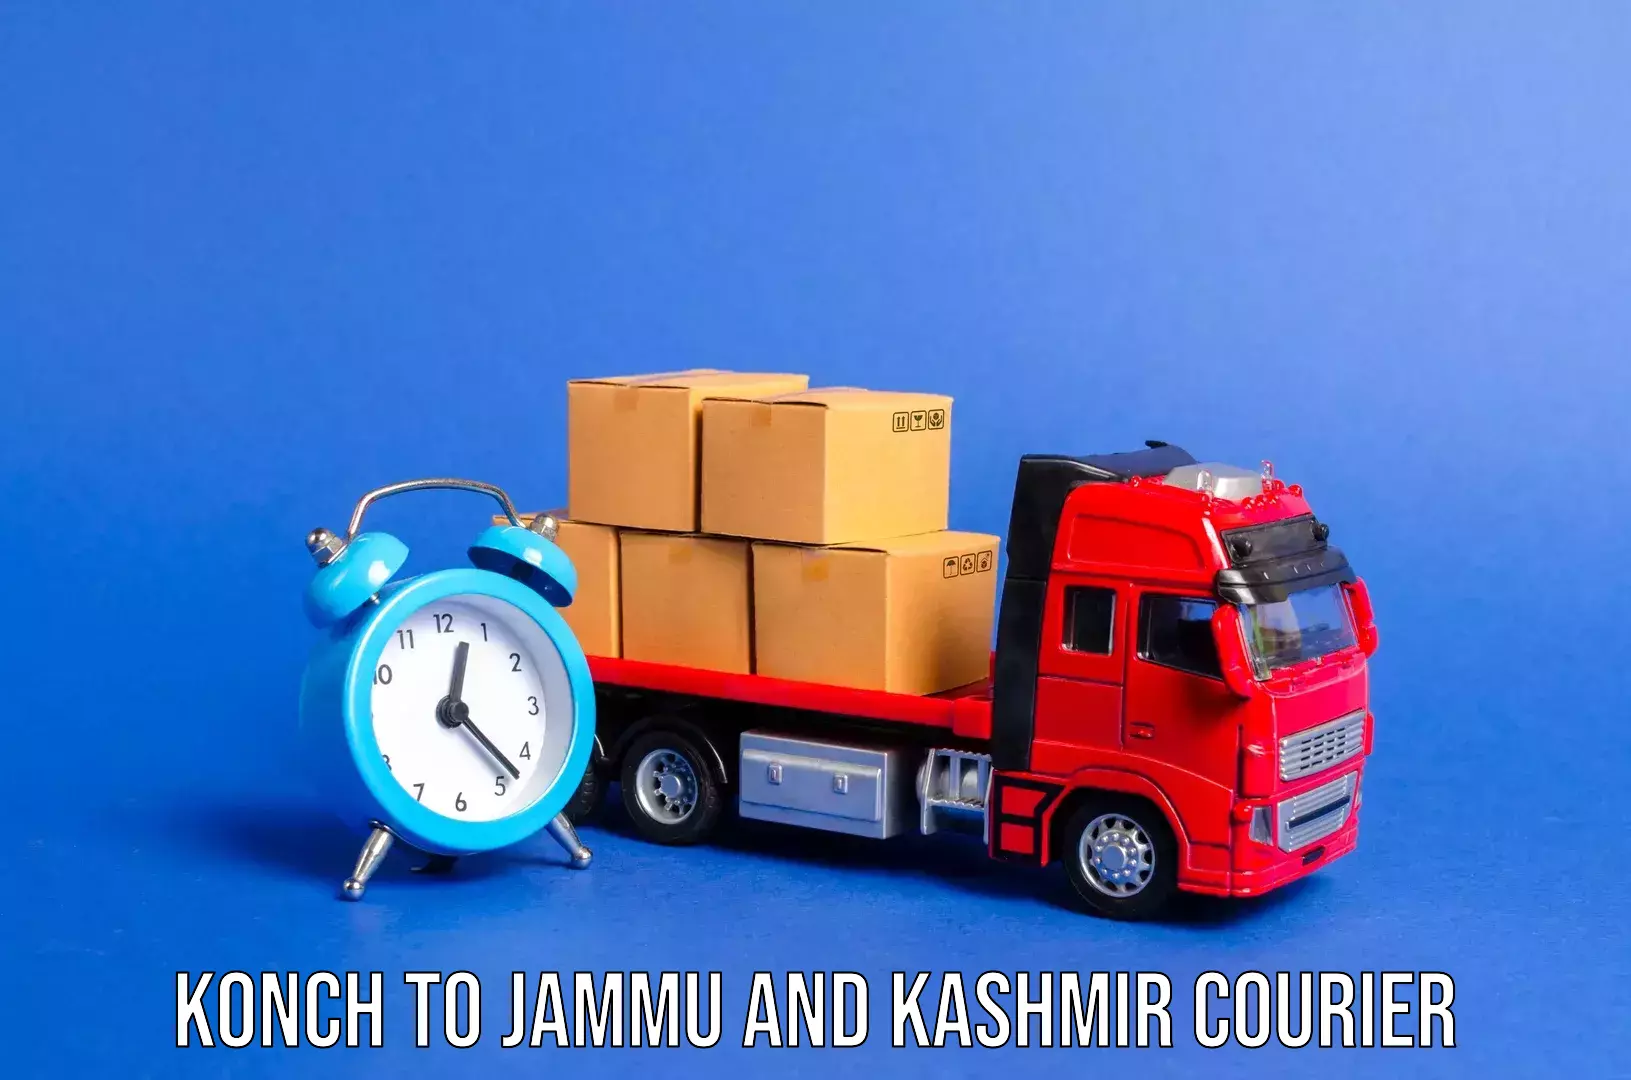 Luggage transport schedule Konch to Jammu and Kashmir